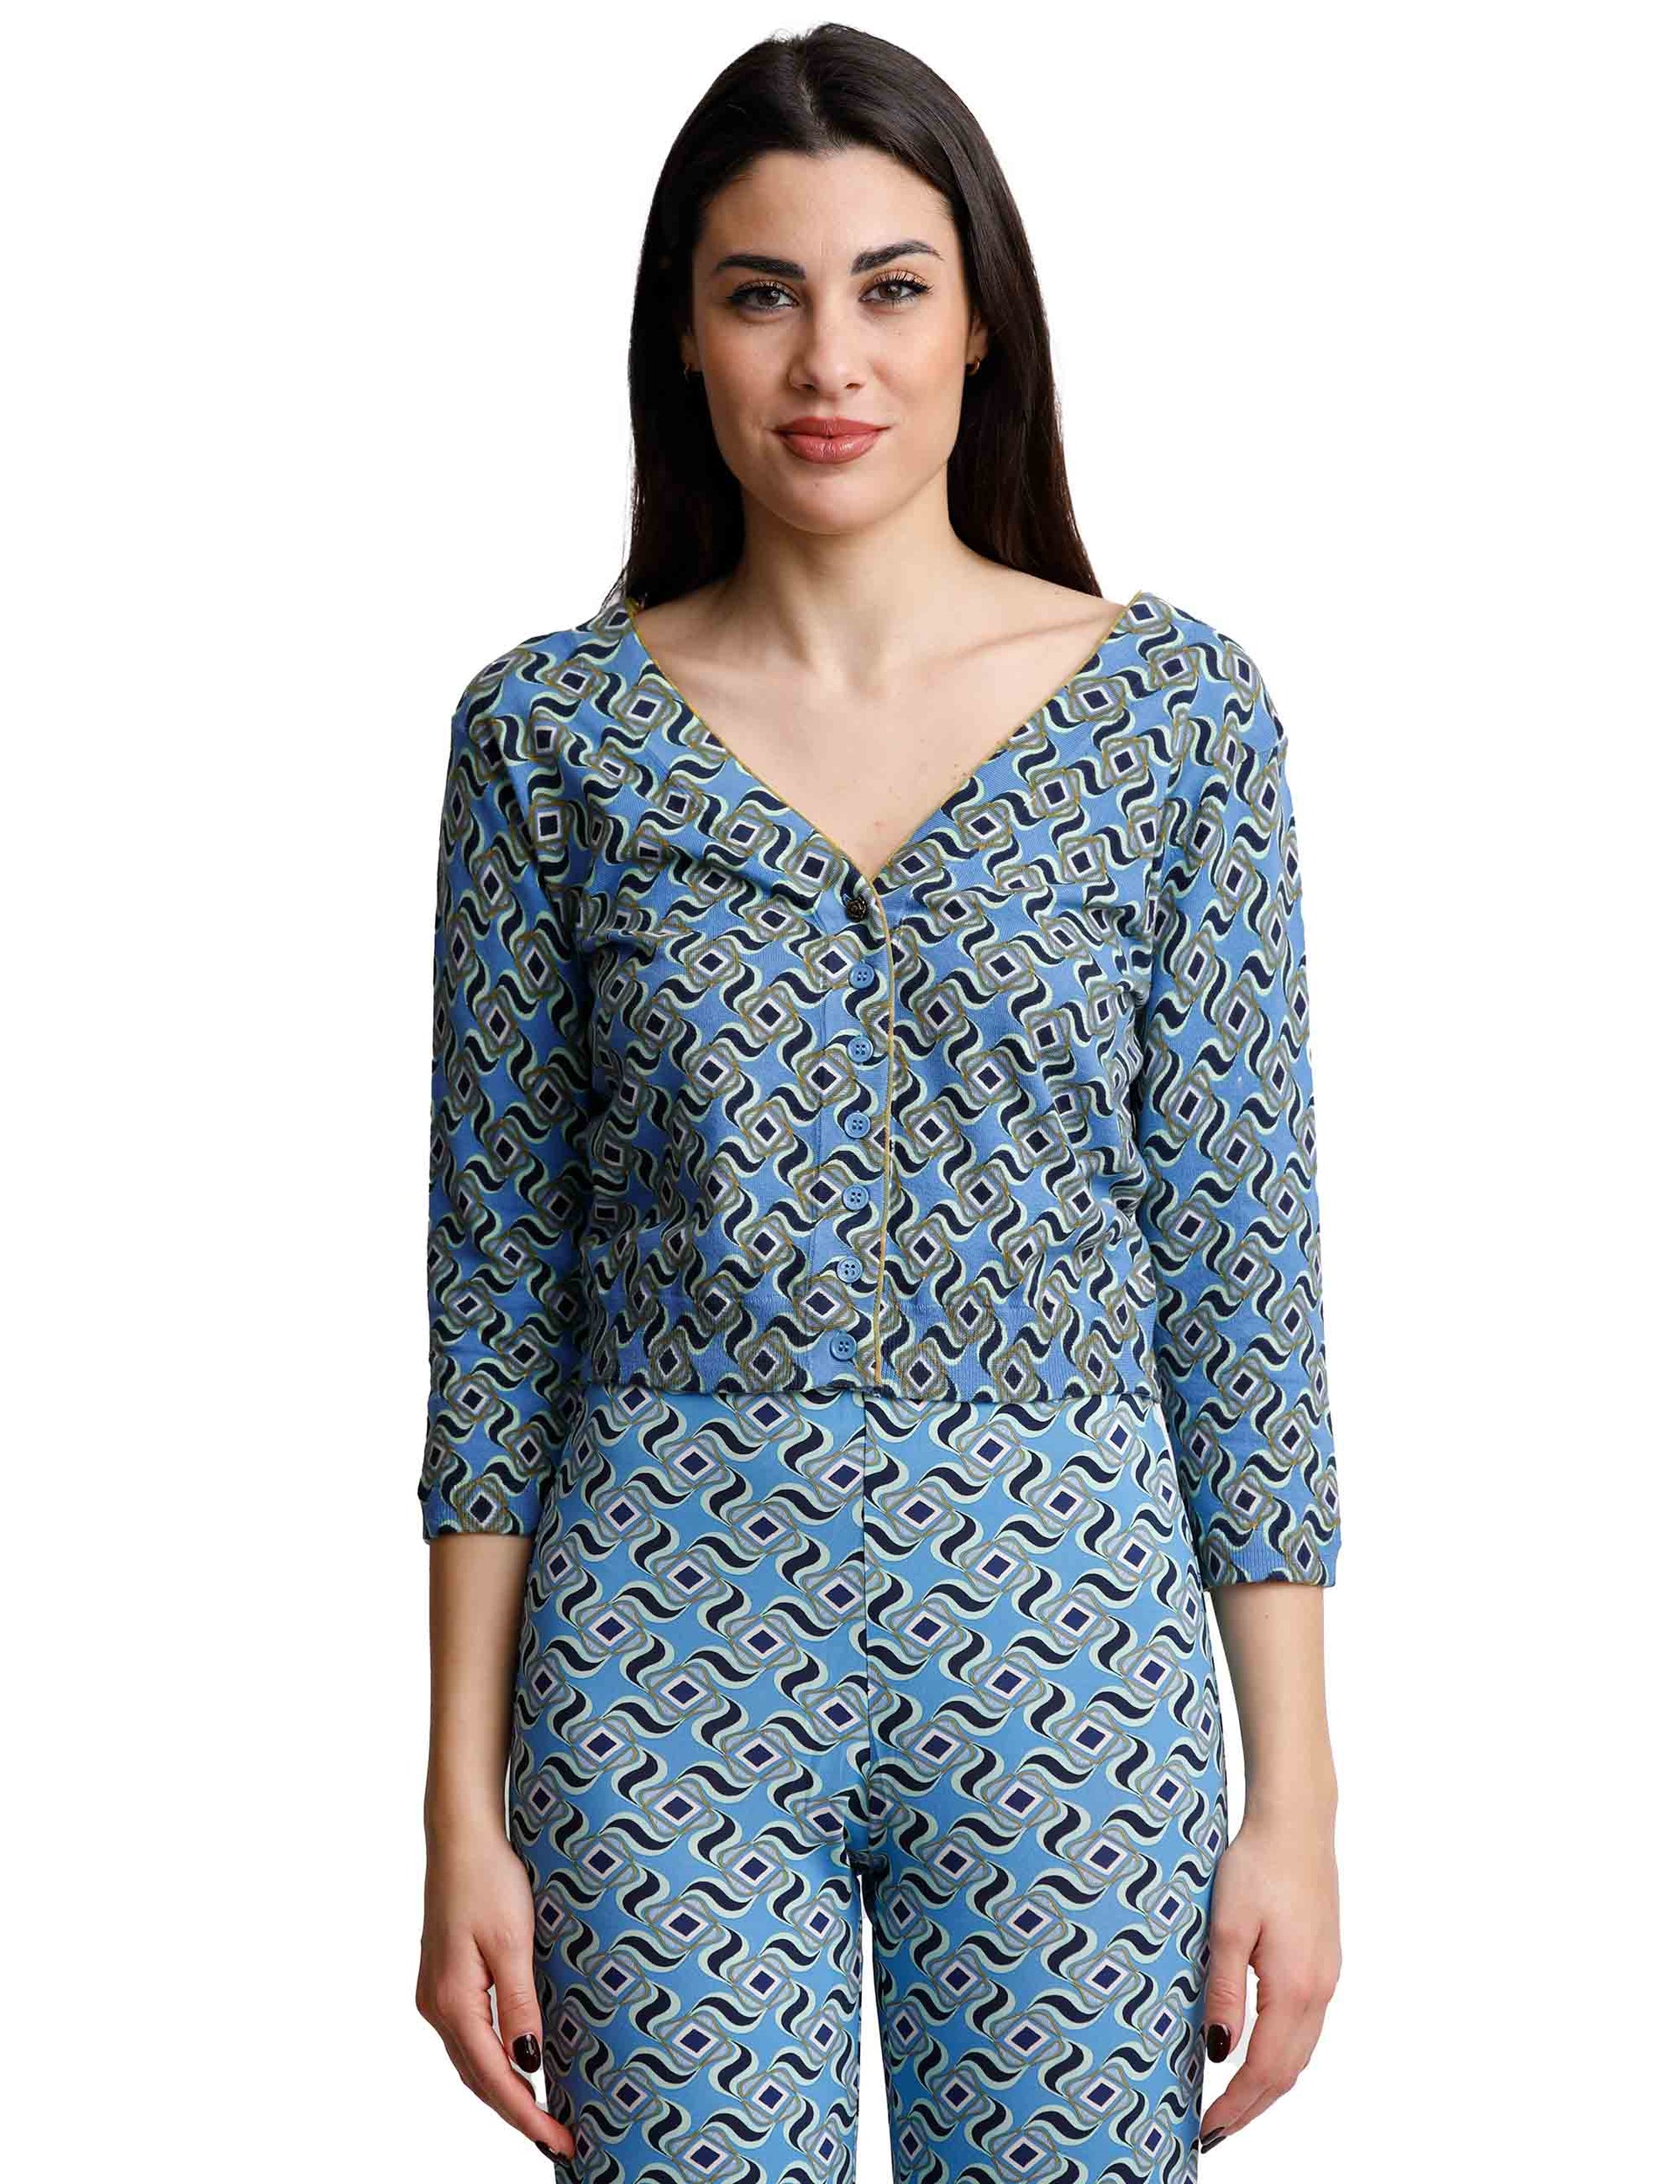 Printed women's cardigan sweaters in blue cotton with 3/4 sleeves